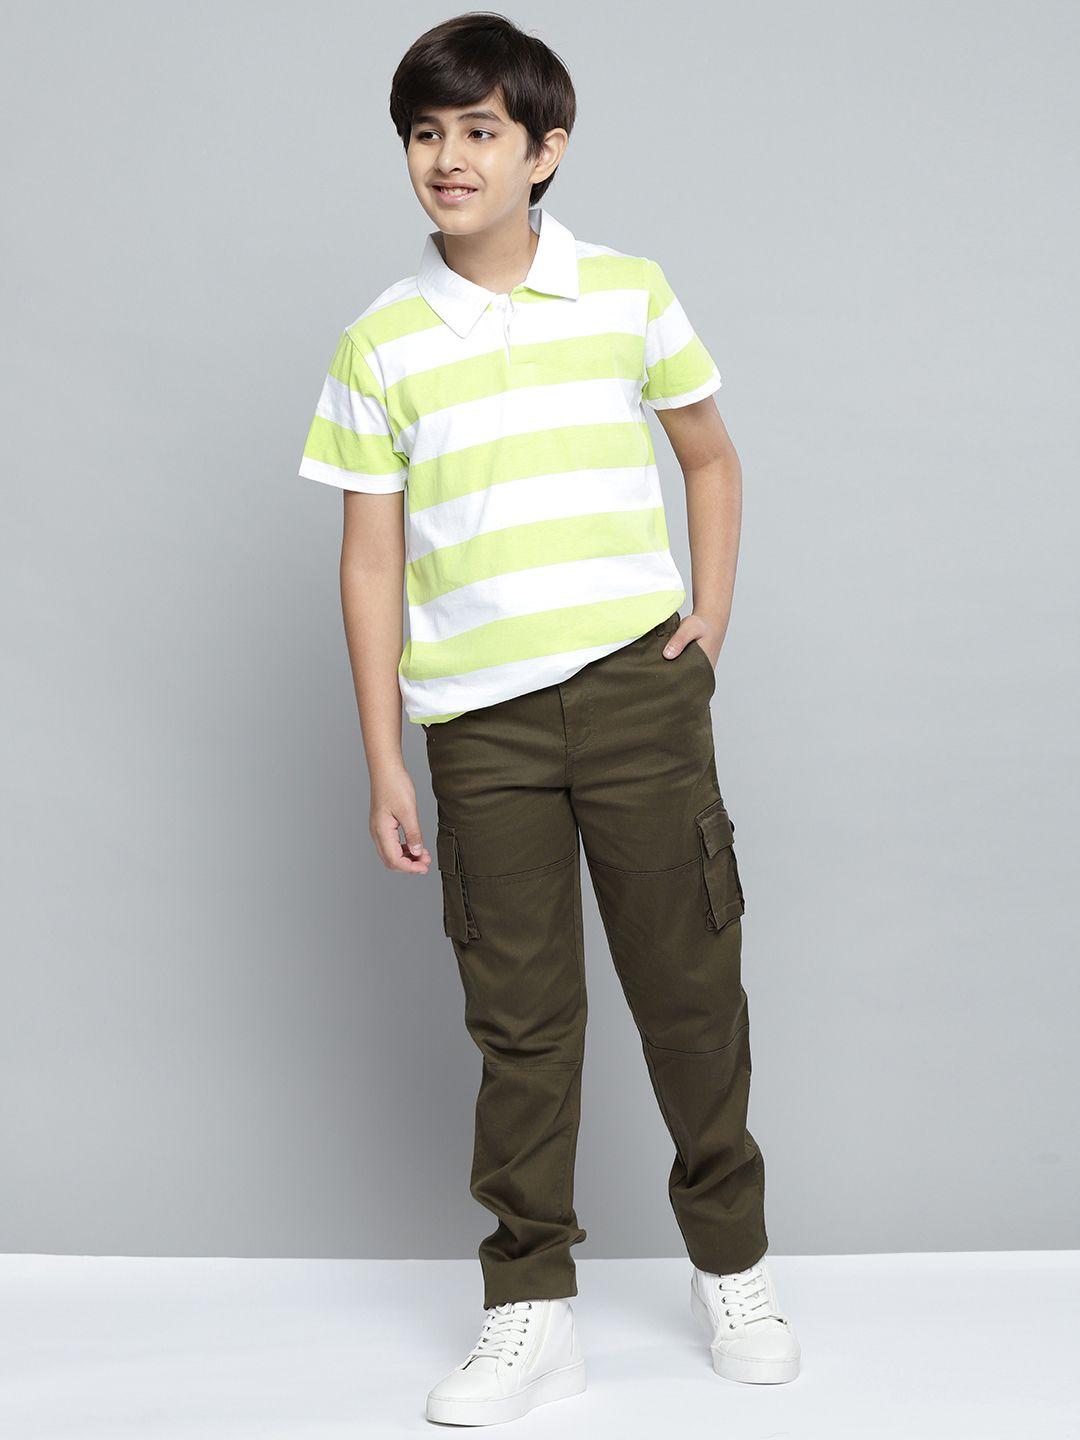 yk-boys-olive-green-solid-pure-cotton-cargos